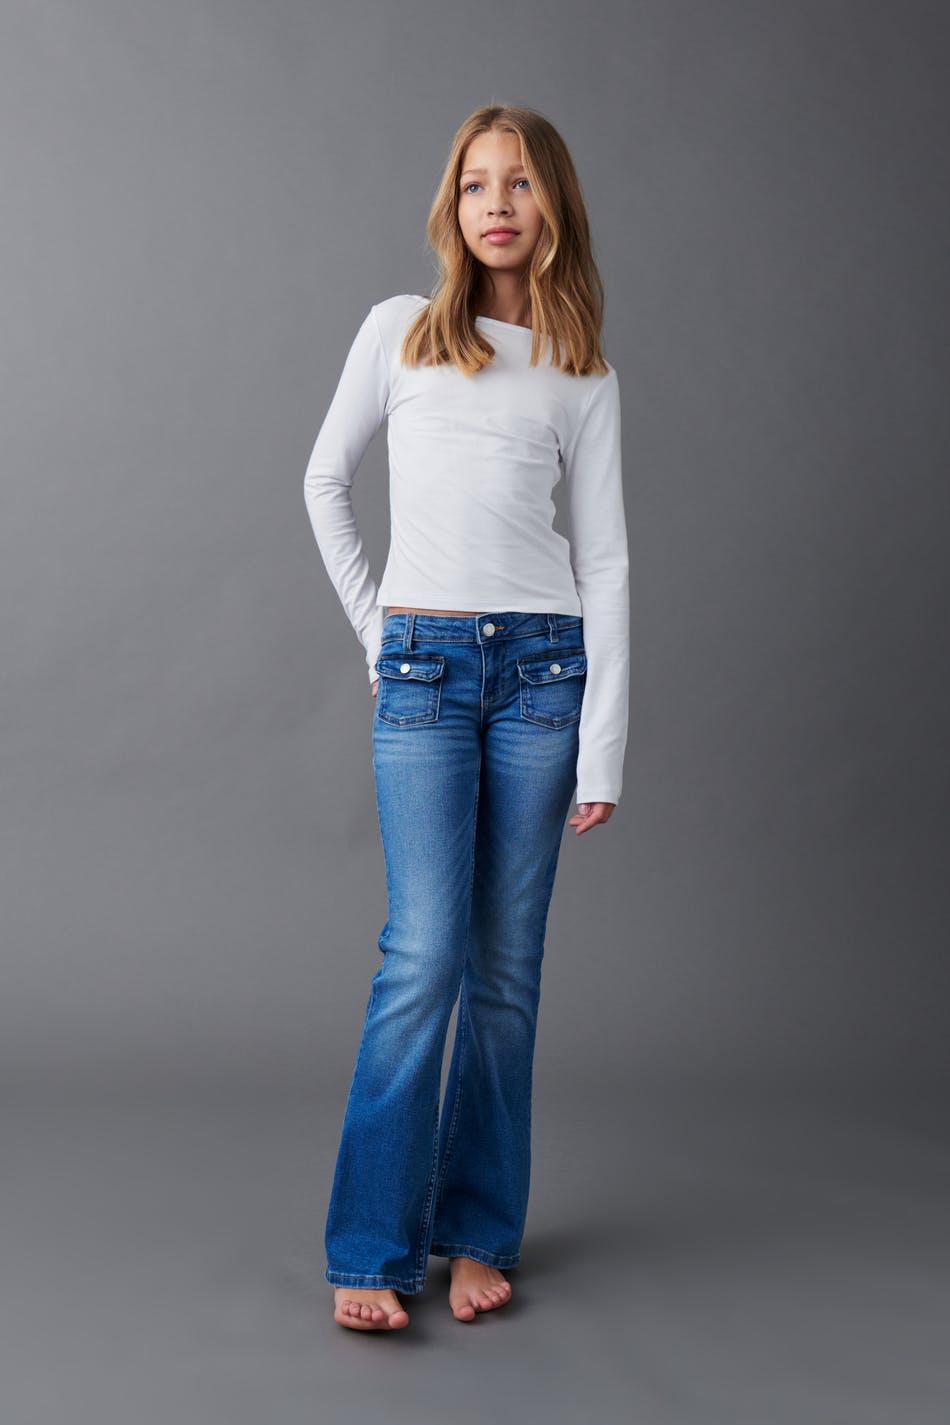 Gina Tricot - Front pocket bootcut jeans - wide jeans - Blue - 158 - Female